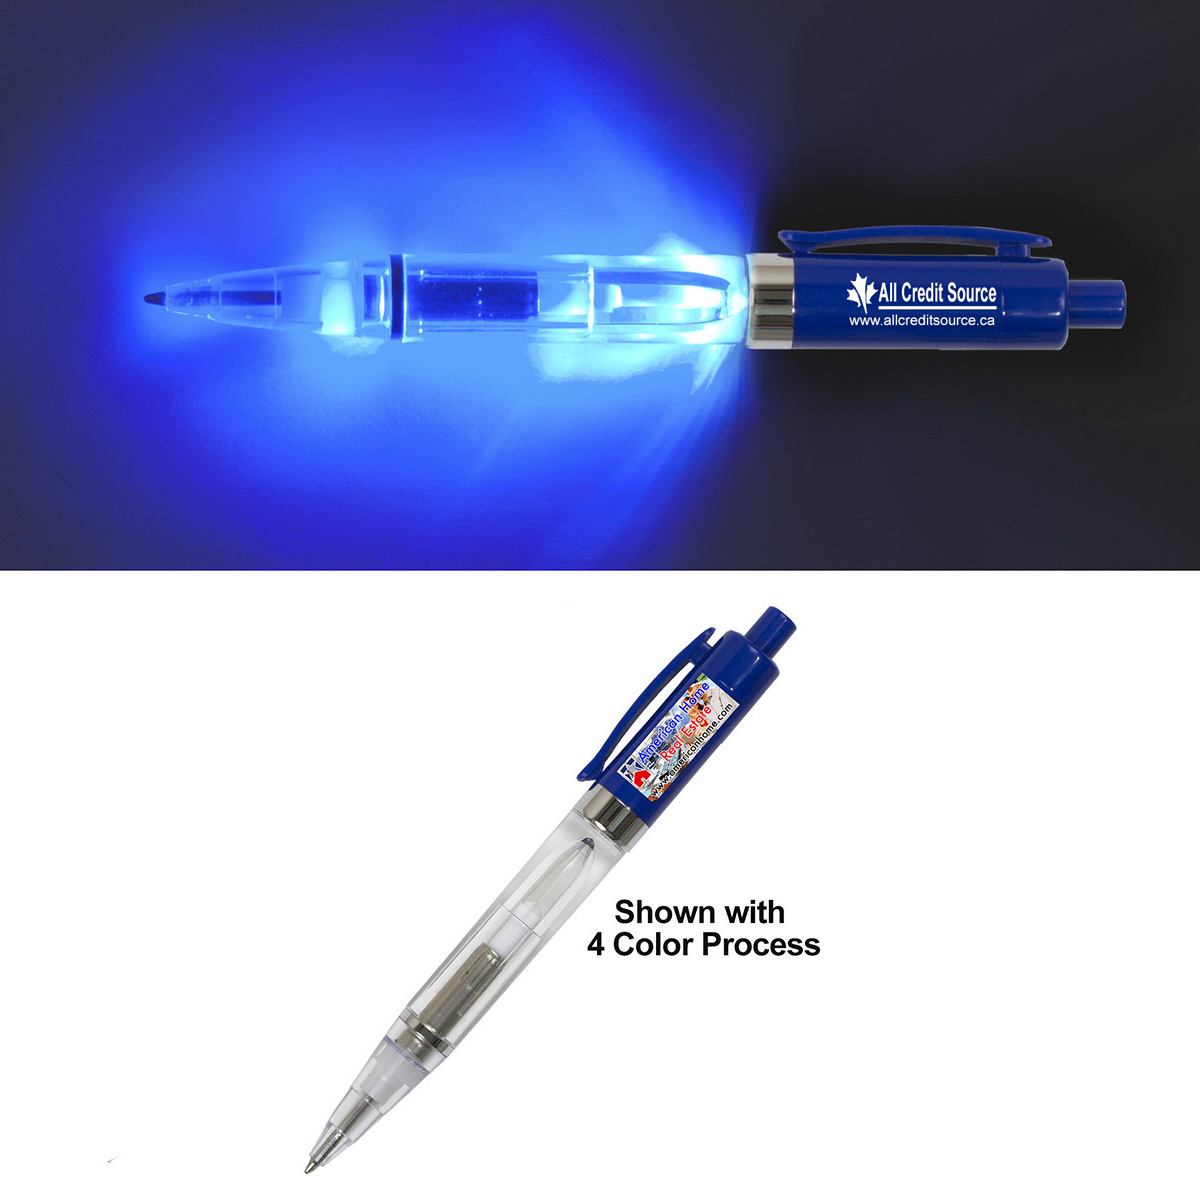 Vicente“ Light Up Pen with BLUE Colour LED Light - Innovation Line Canada